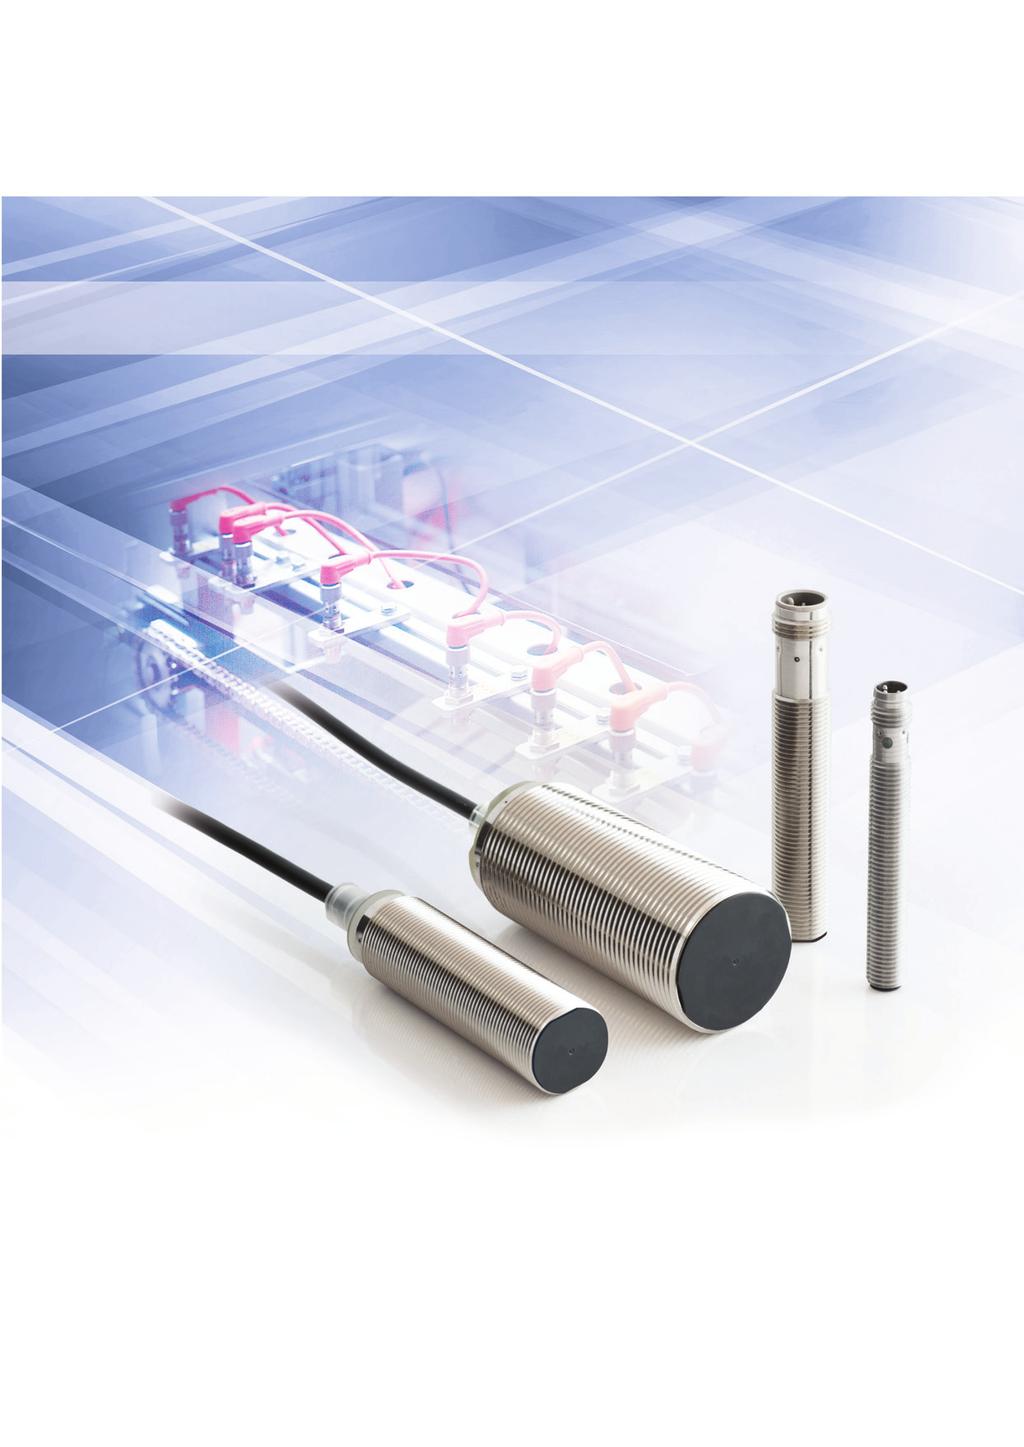 E2B PROXIMITY SENSORS Enjoy innovation and reliability today» Time and